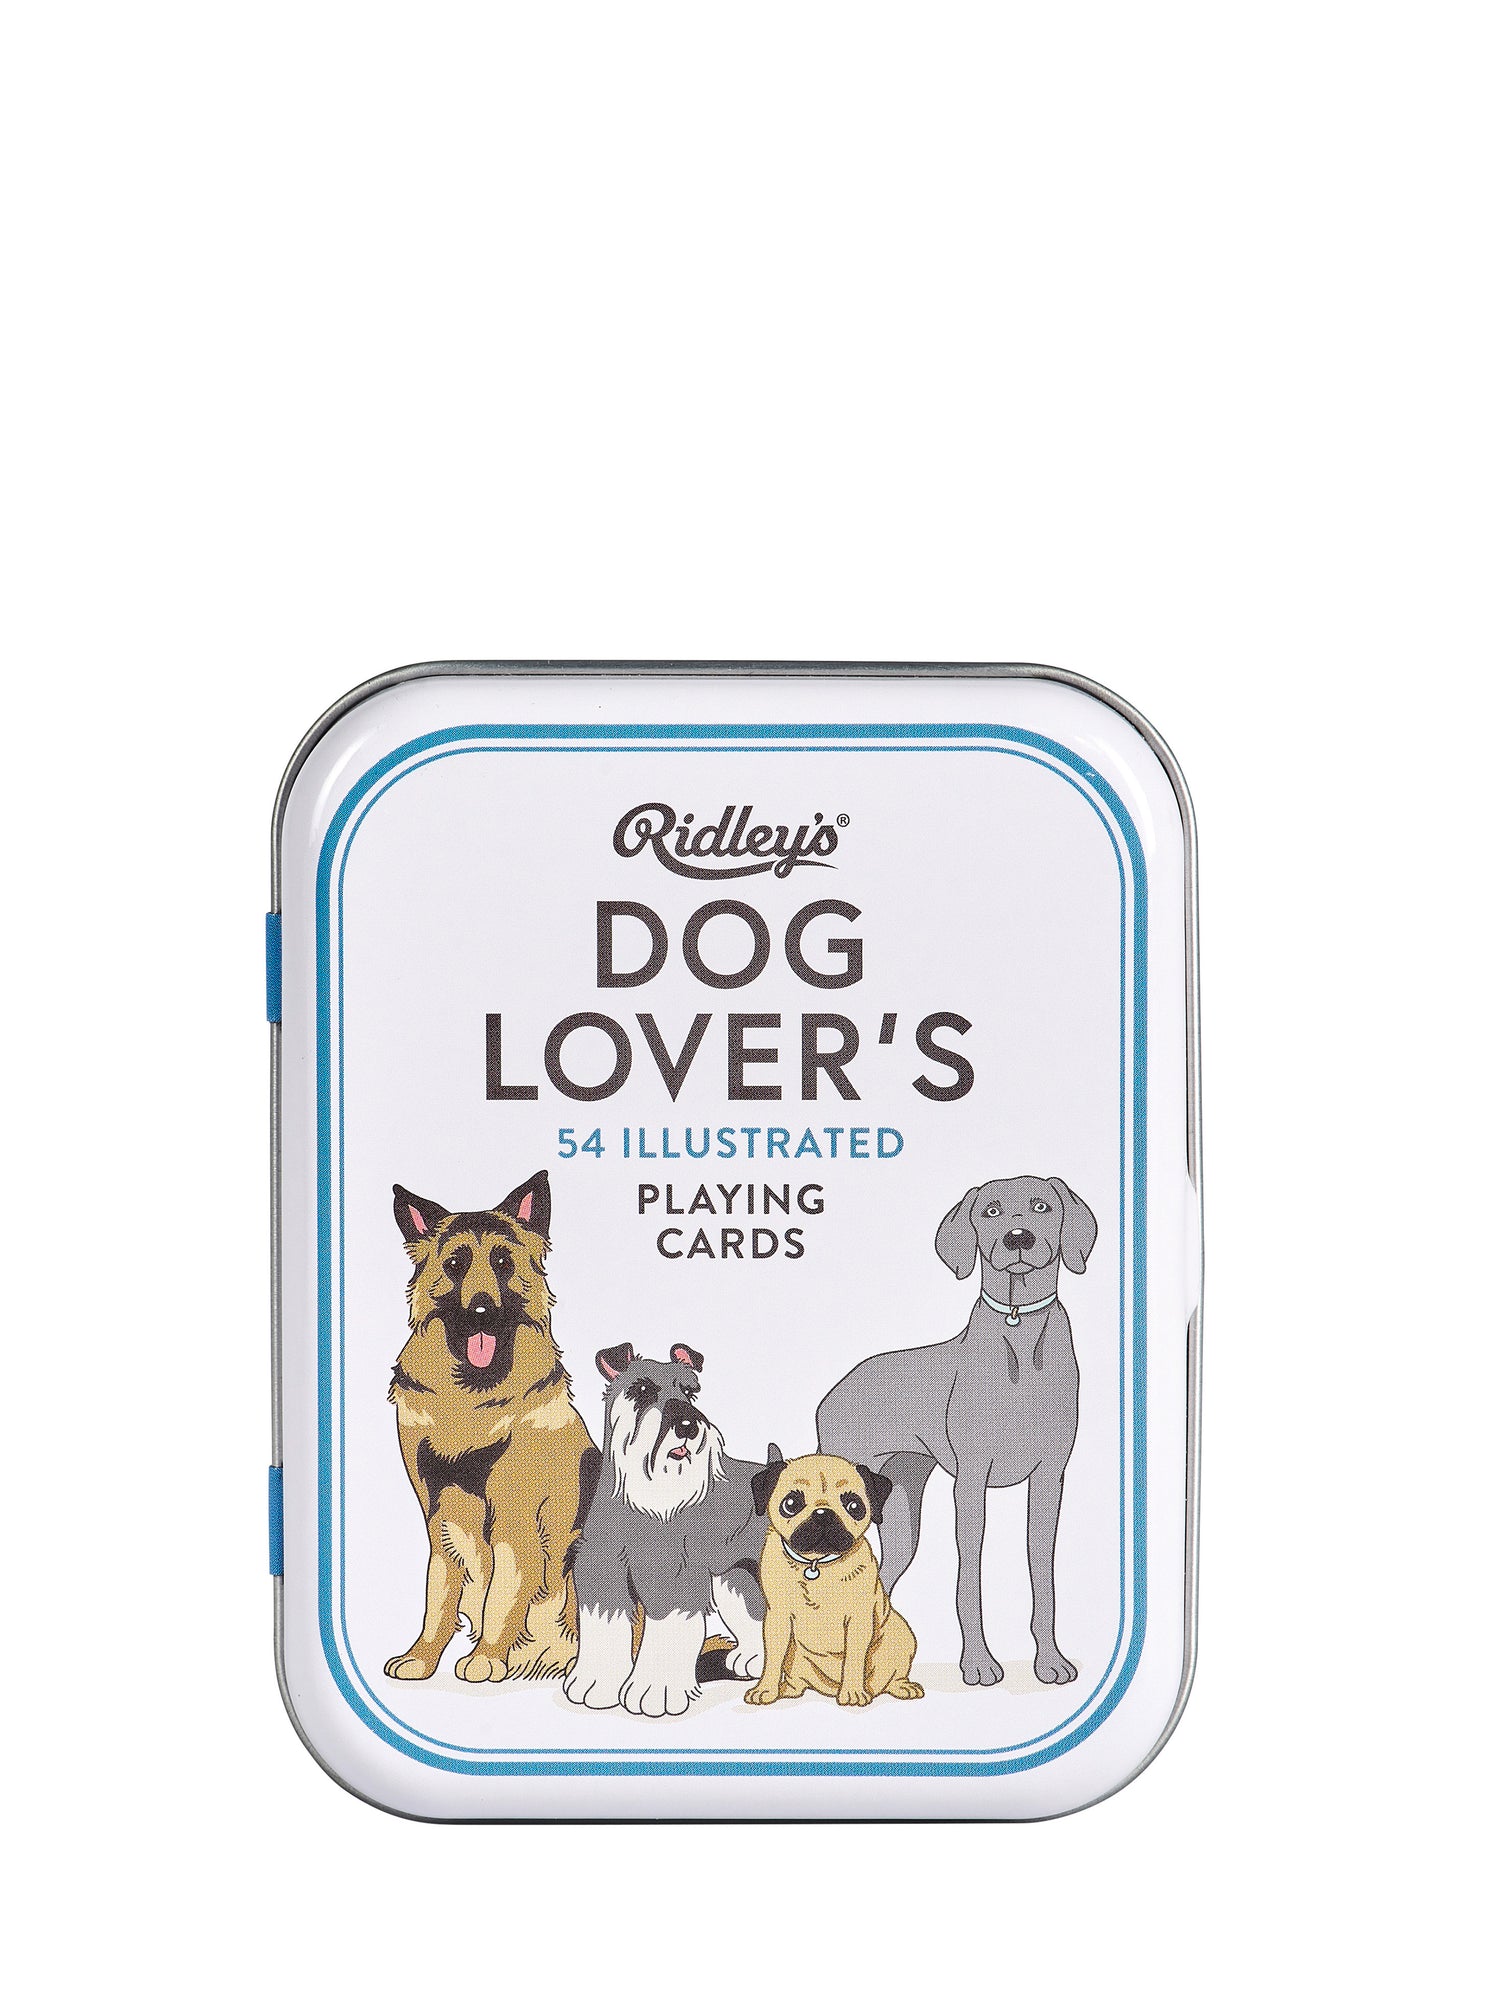 Dog Lover's  playing cards